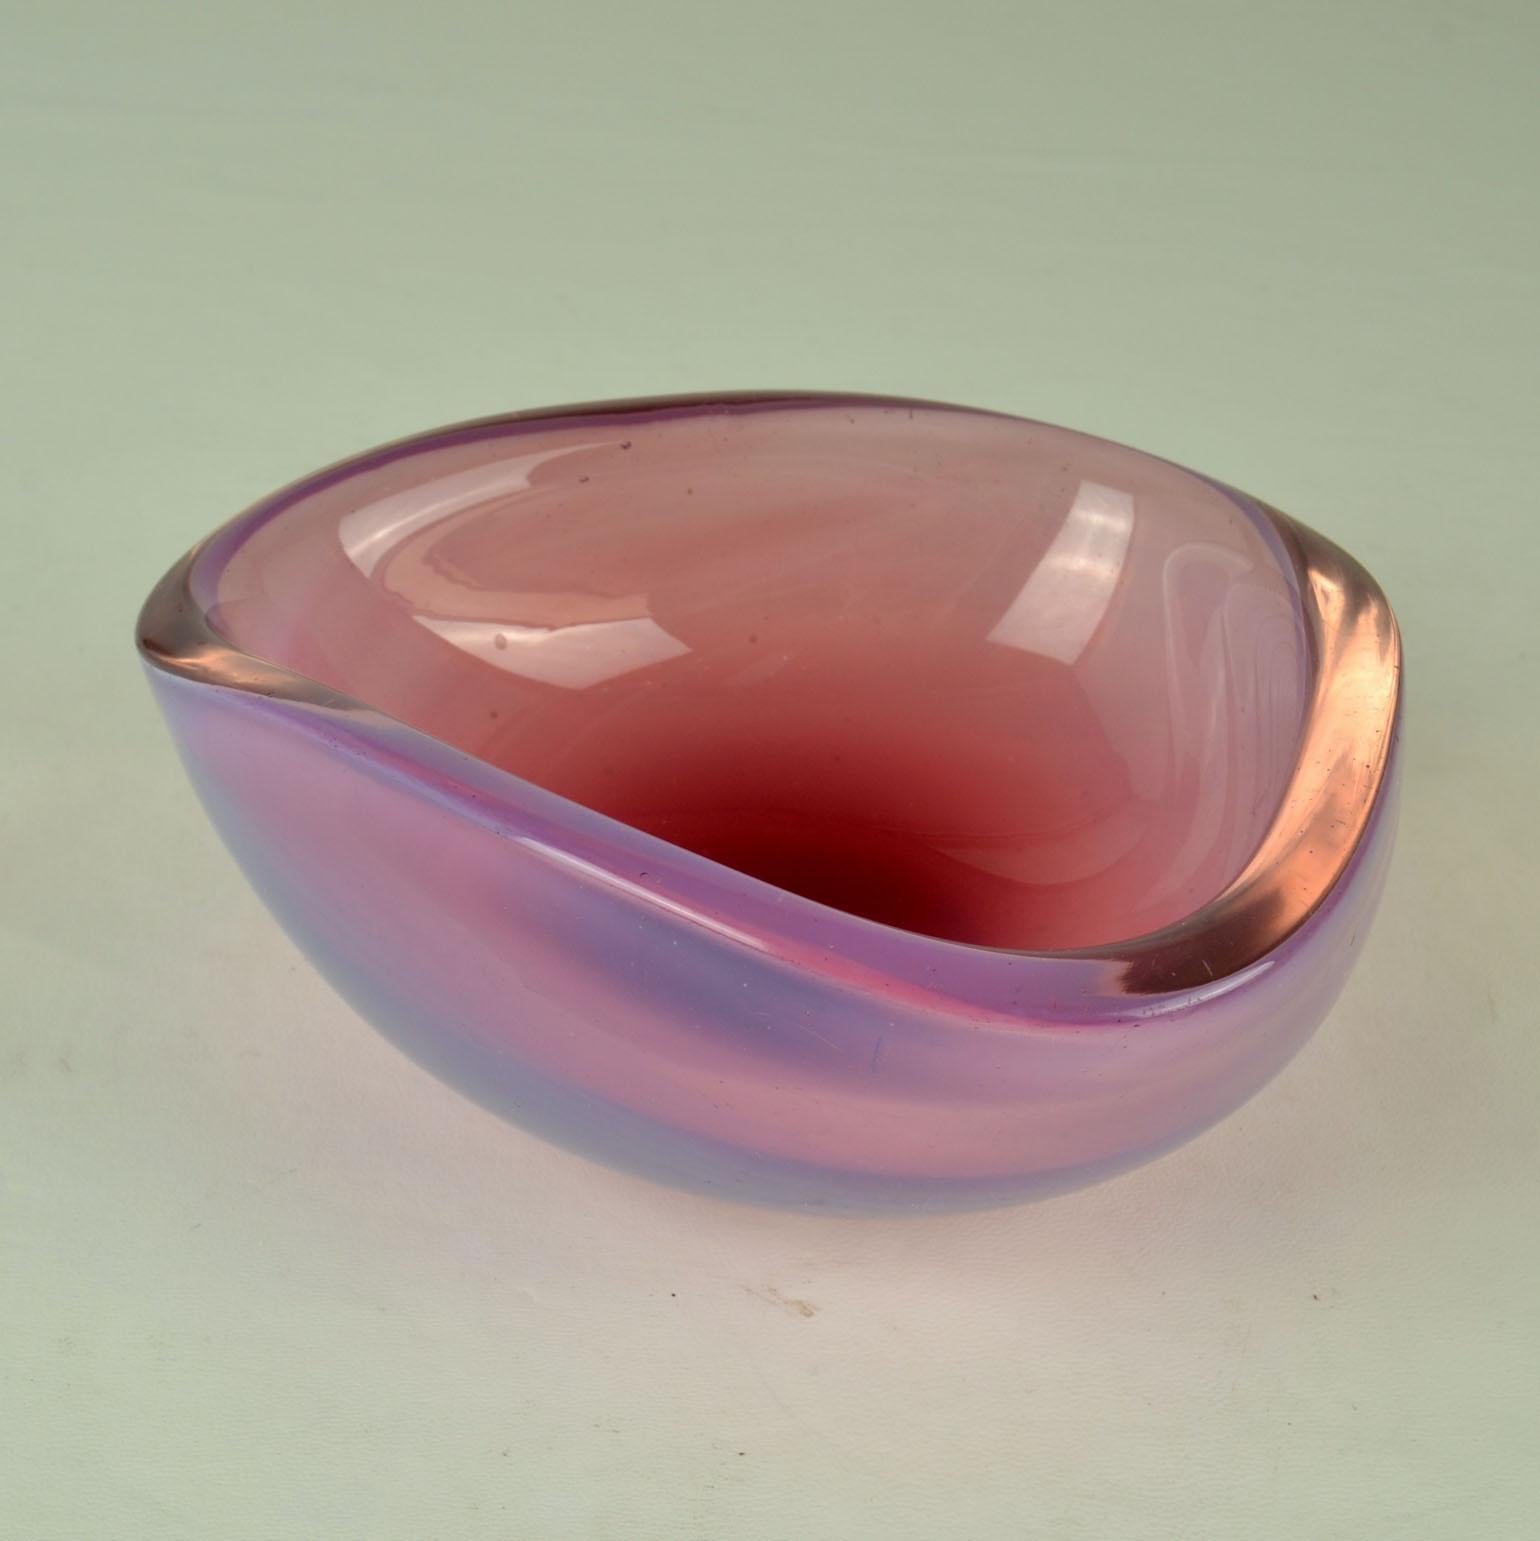 Glass bowls triangular shape by Flavio Poli for Seguso 1960's in soft pink. The bowl is hand blown, known as Venetian Sommerso, made in Murano, Venice, Italy. 
The bowls a combination of soft pink encased in clear glass.

Italian glass artist